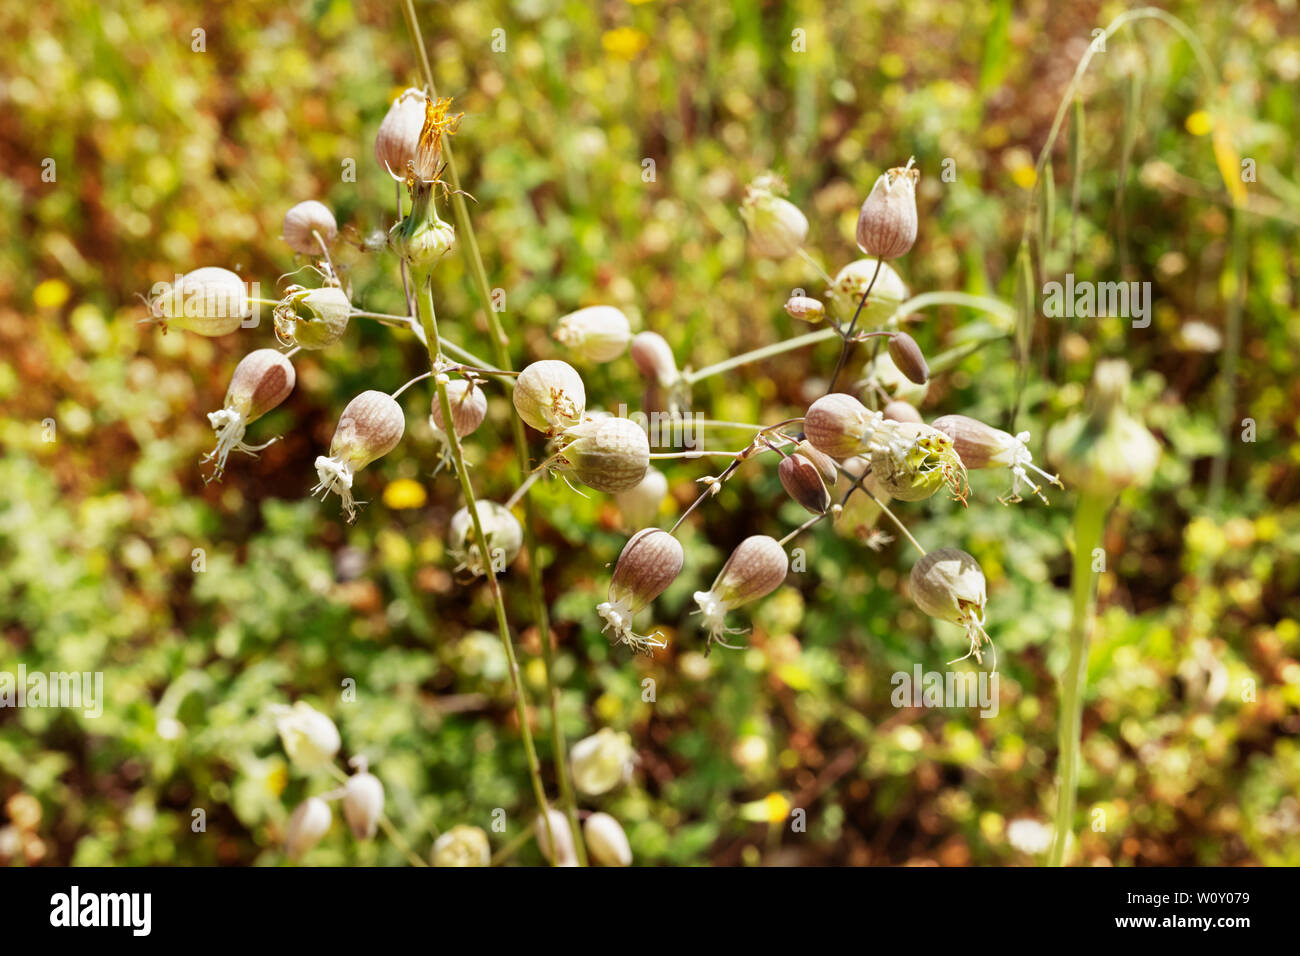 Flowers of bladder campion or silene vulgaris in a sunny  day , in the background yellow flowers  and greenery out of focus Stock Photo